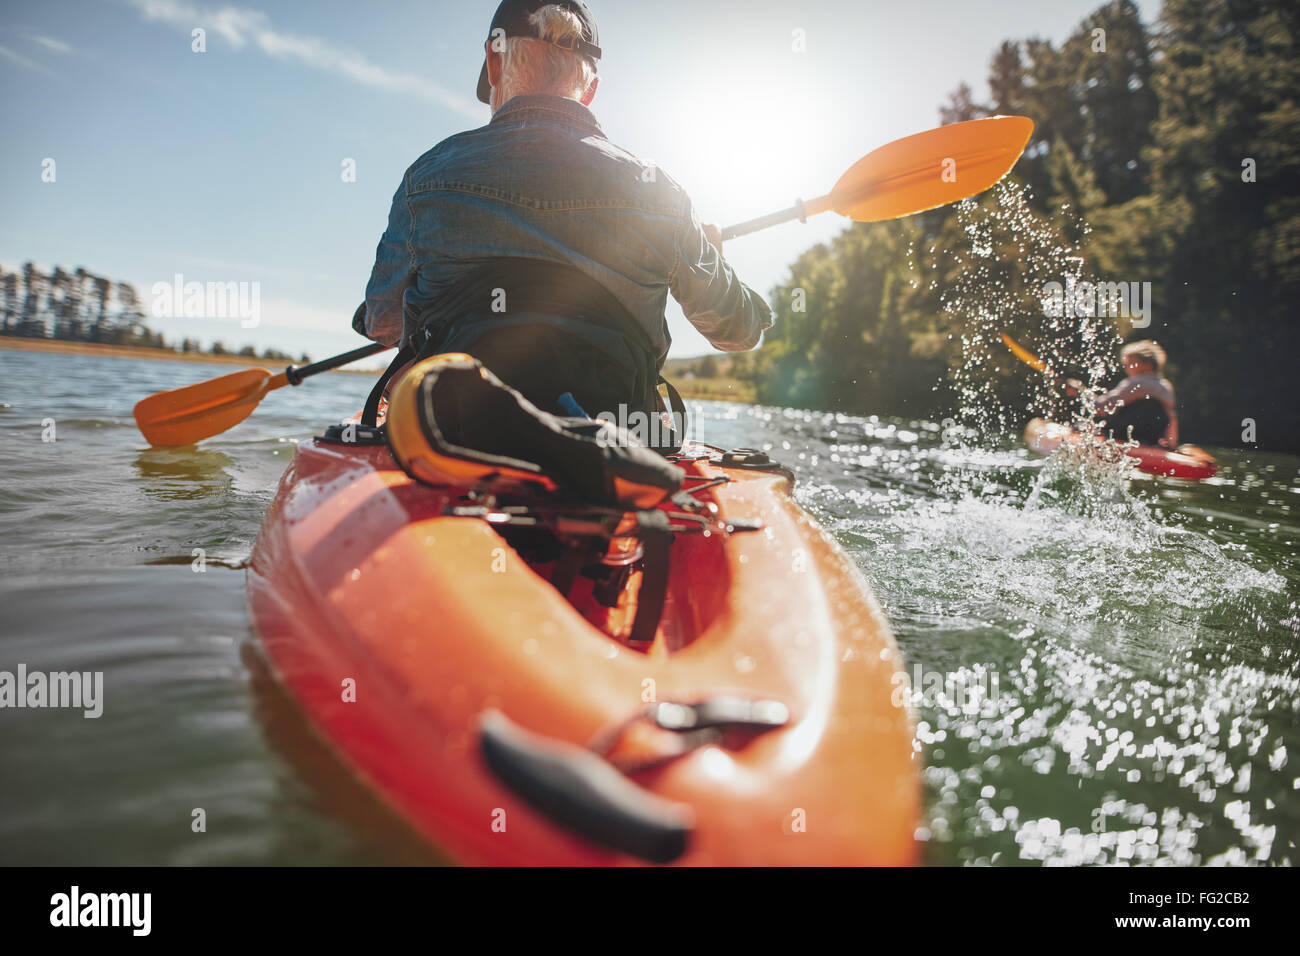 Rear view of man paddling kayak in lake with woman in background. Couple kayaking in lake on a sunny day. Stock Photo